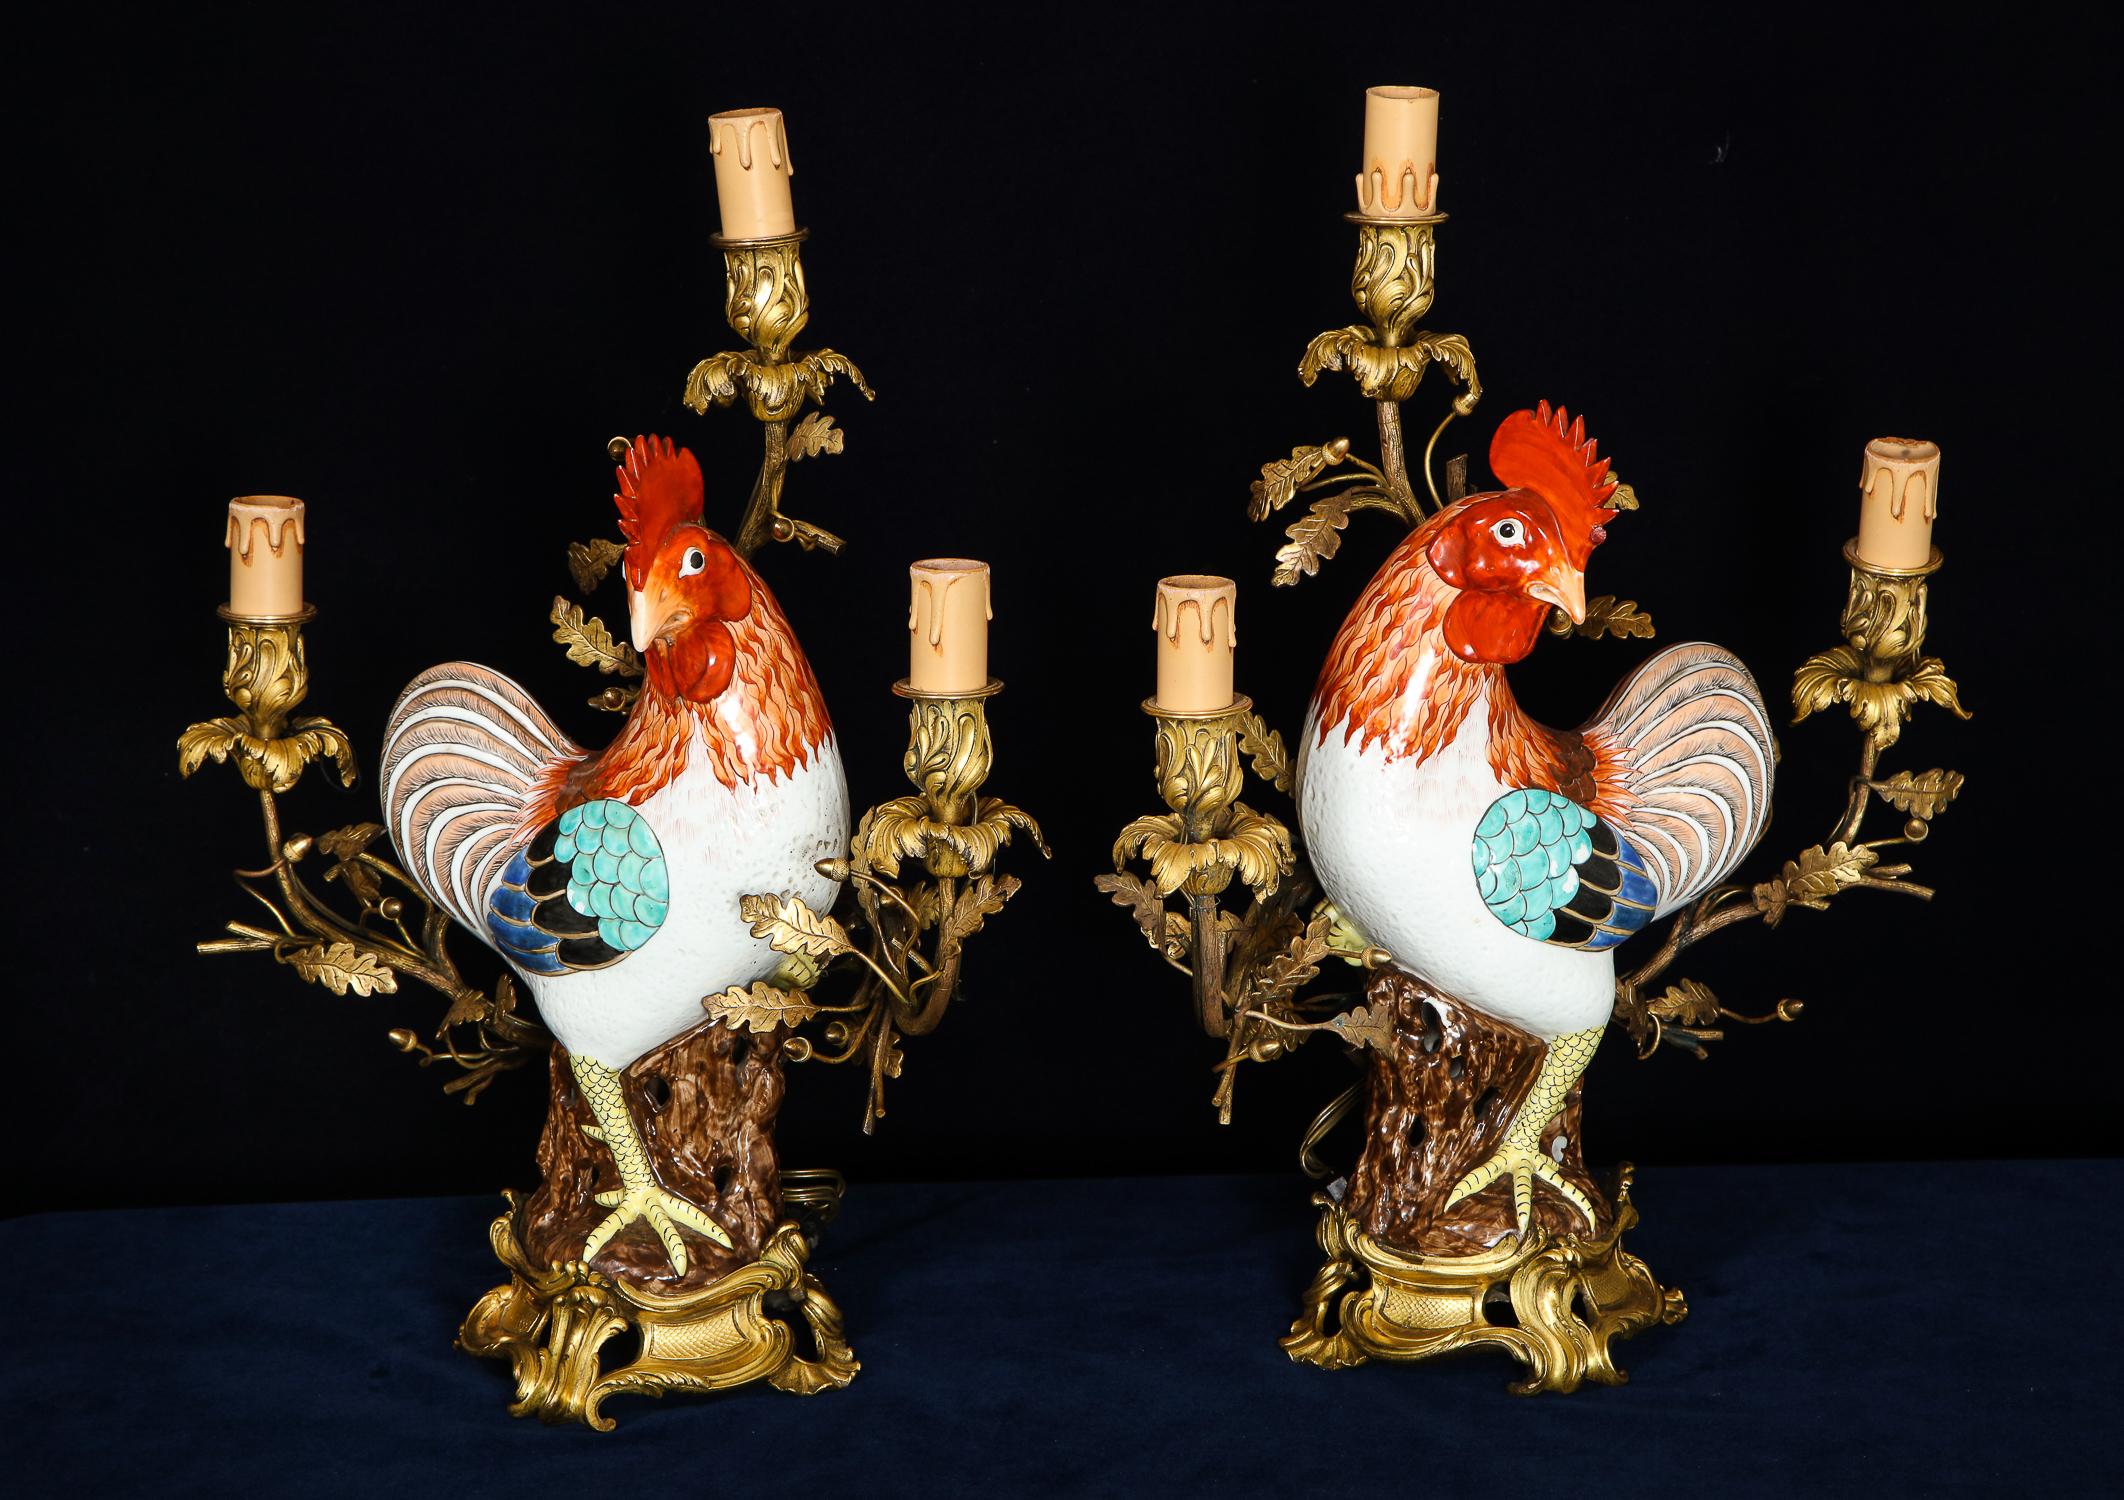 Pair of Chinese Export Rooster Louis XVI Style Gilt Bronze-Mounted Candelabras In Good Condition For Sale In New York, NY